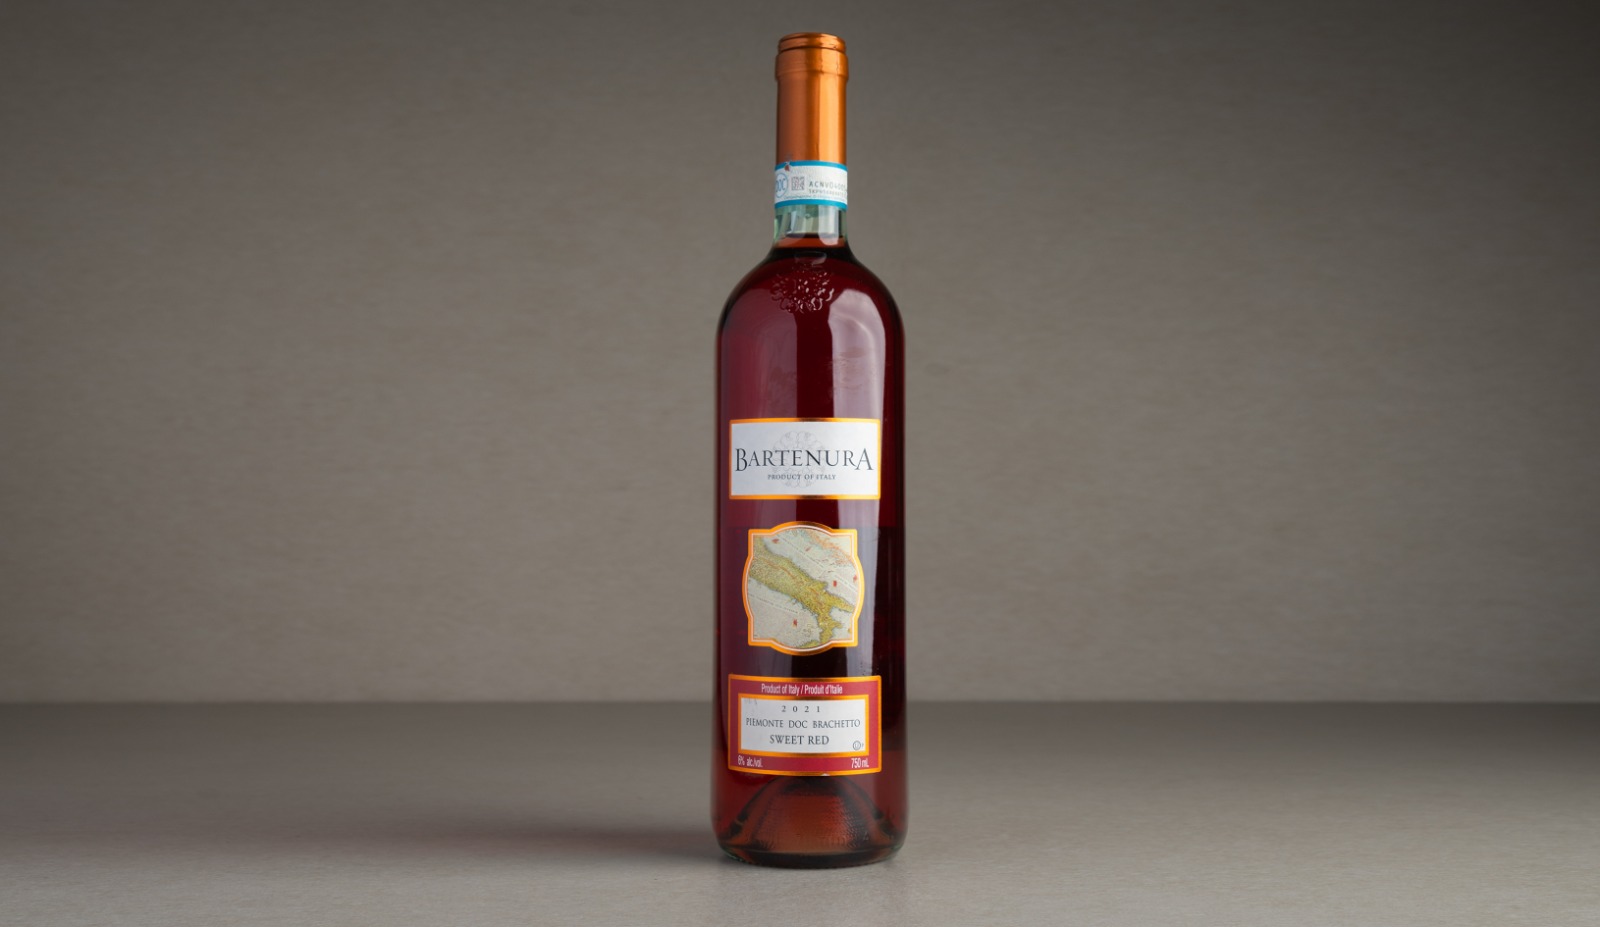 Wine with low alcohol strength, sweet red "Barchetto" in Bartanura